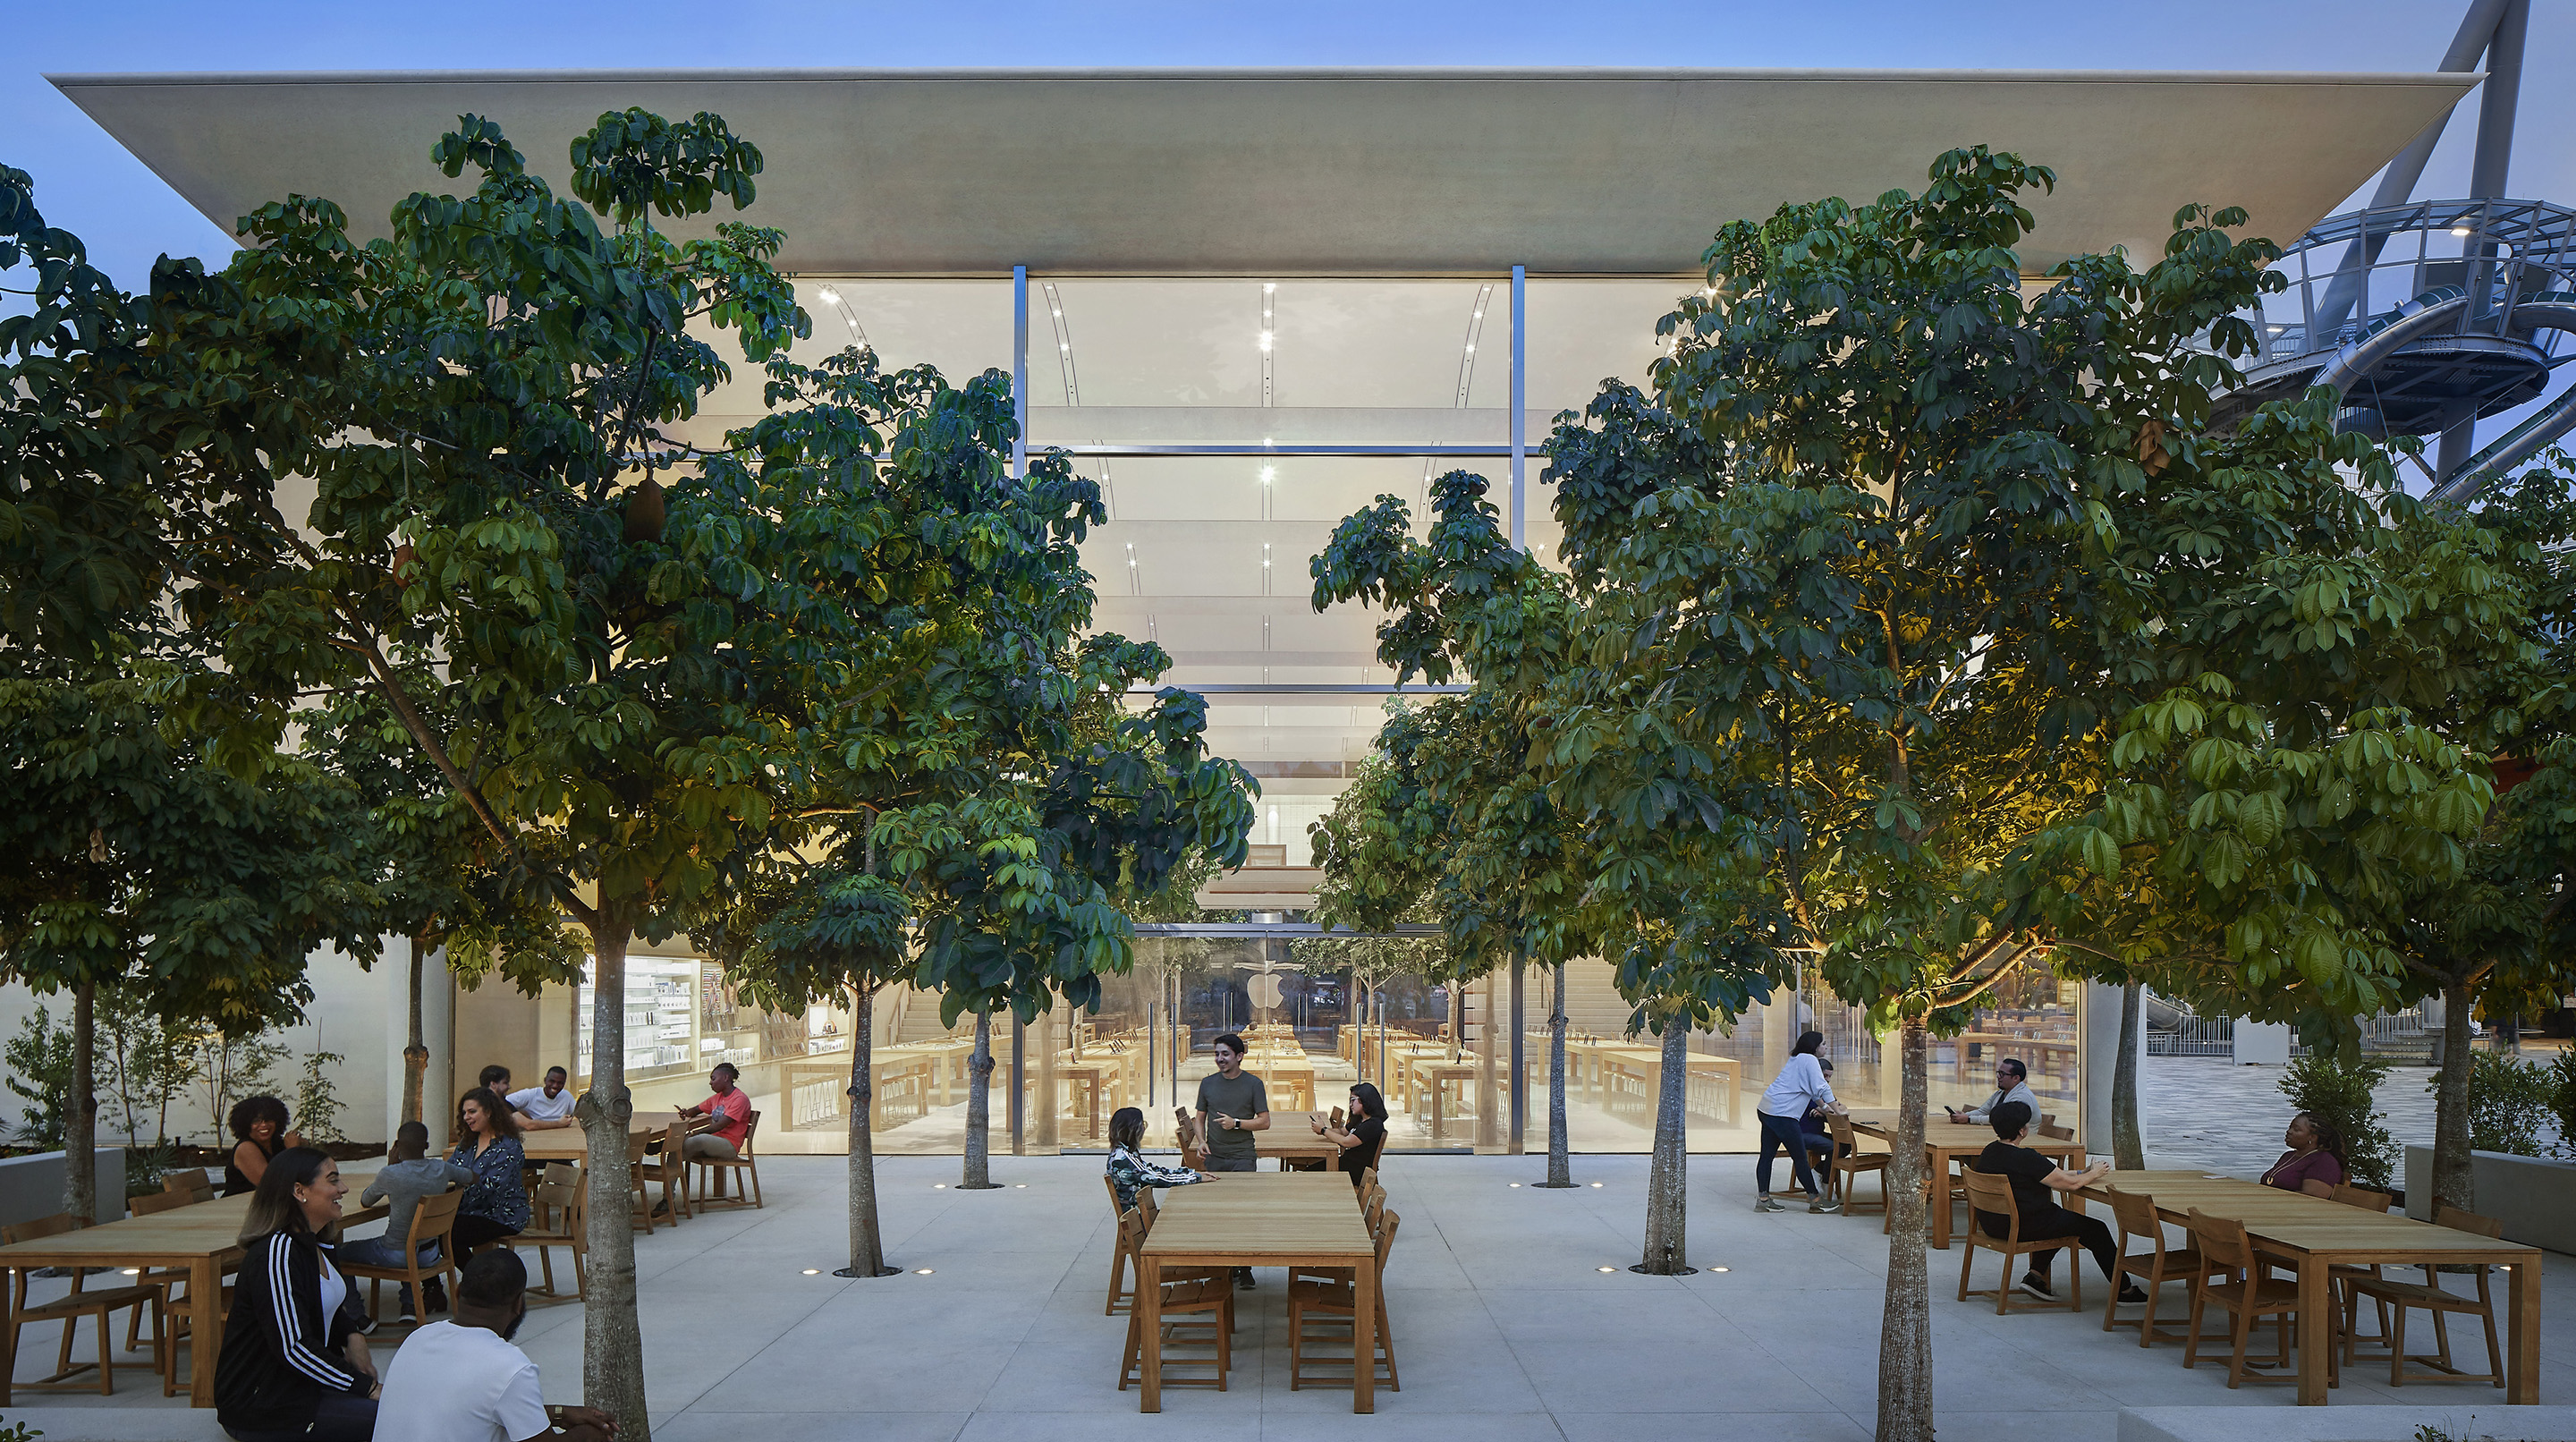 The redesigned Apple Dadeland has officially opened in Miami, Florida